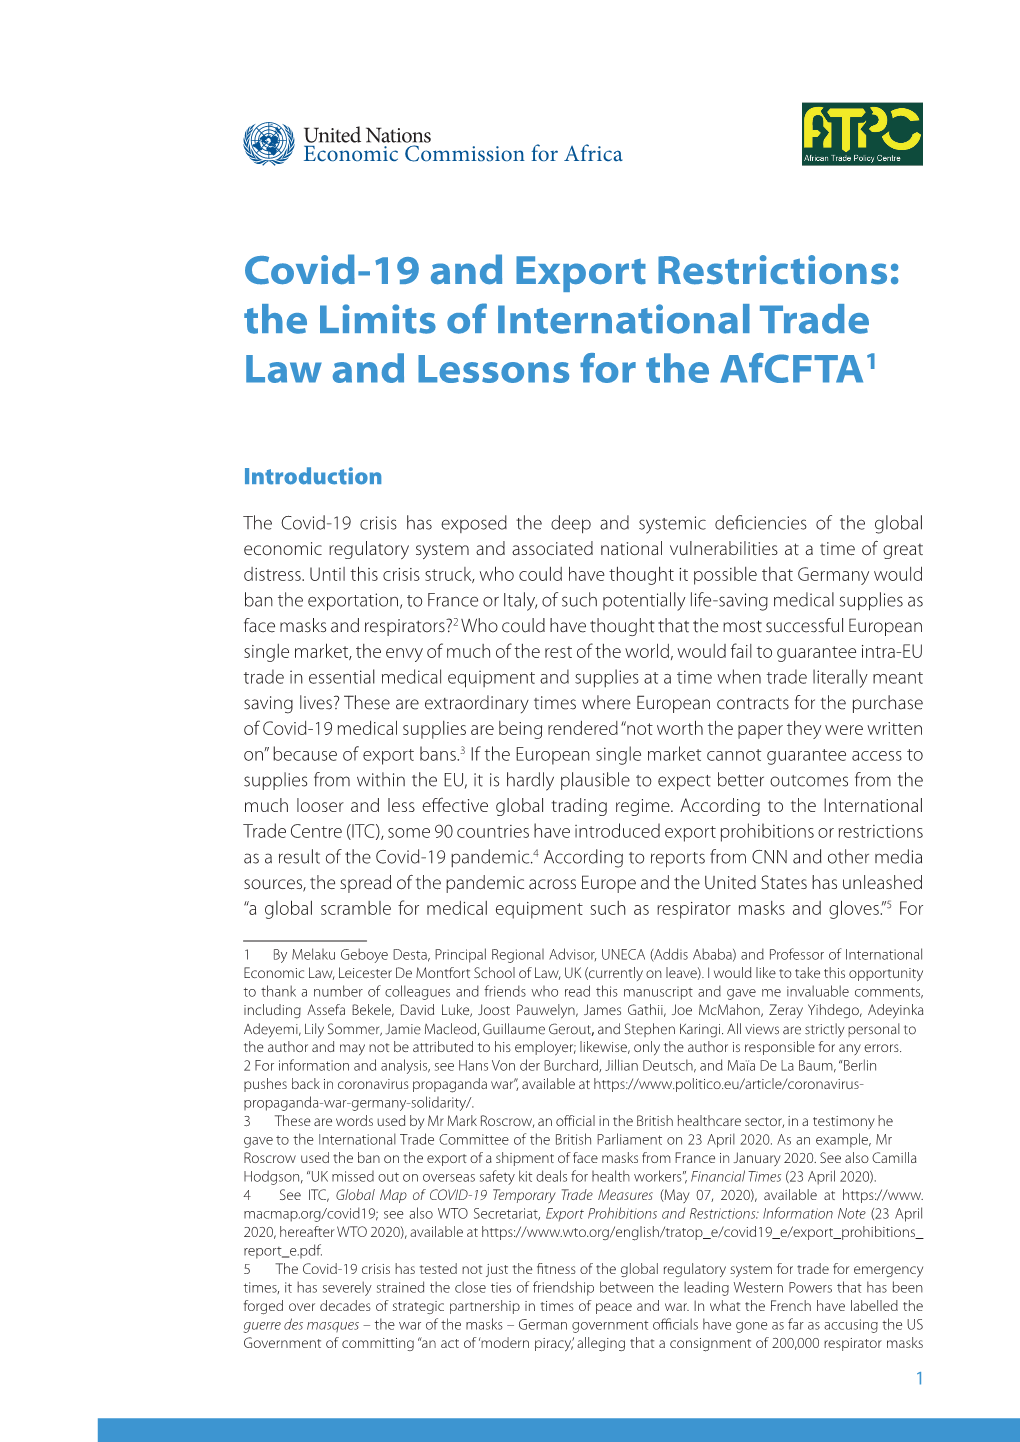 Covid-19 and Export Restrictions: the Limits of International Trade Law and Lessons for the Afcfta1